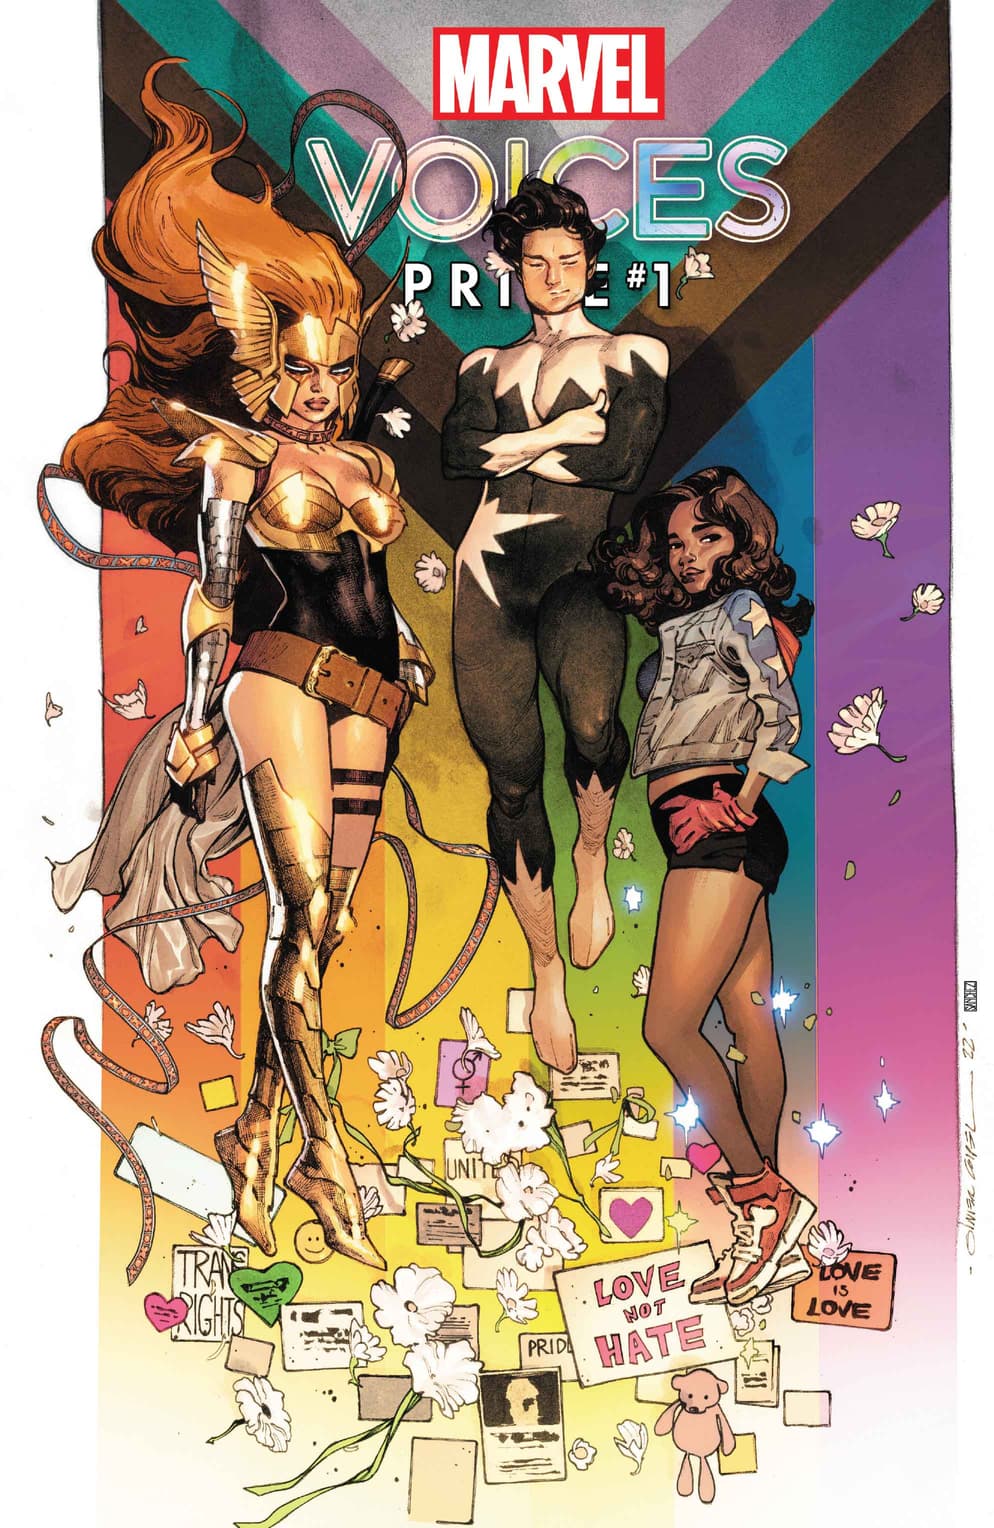 MARVEL’S VOICES: PRIDE #1 cover by Olivier Coipel